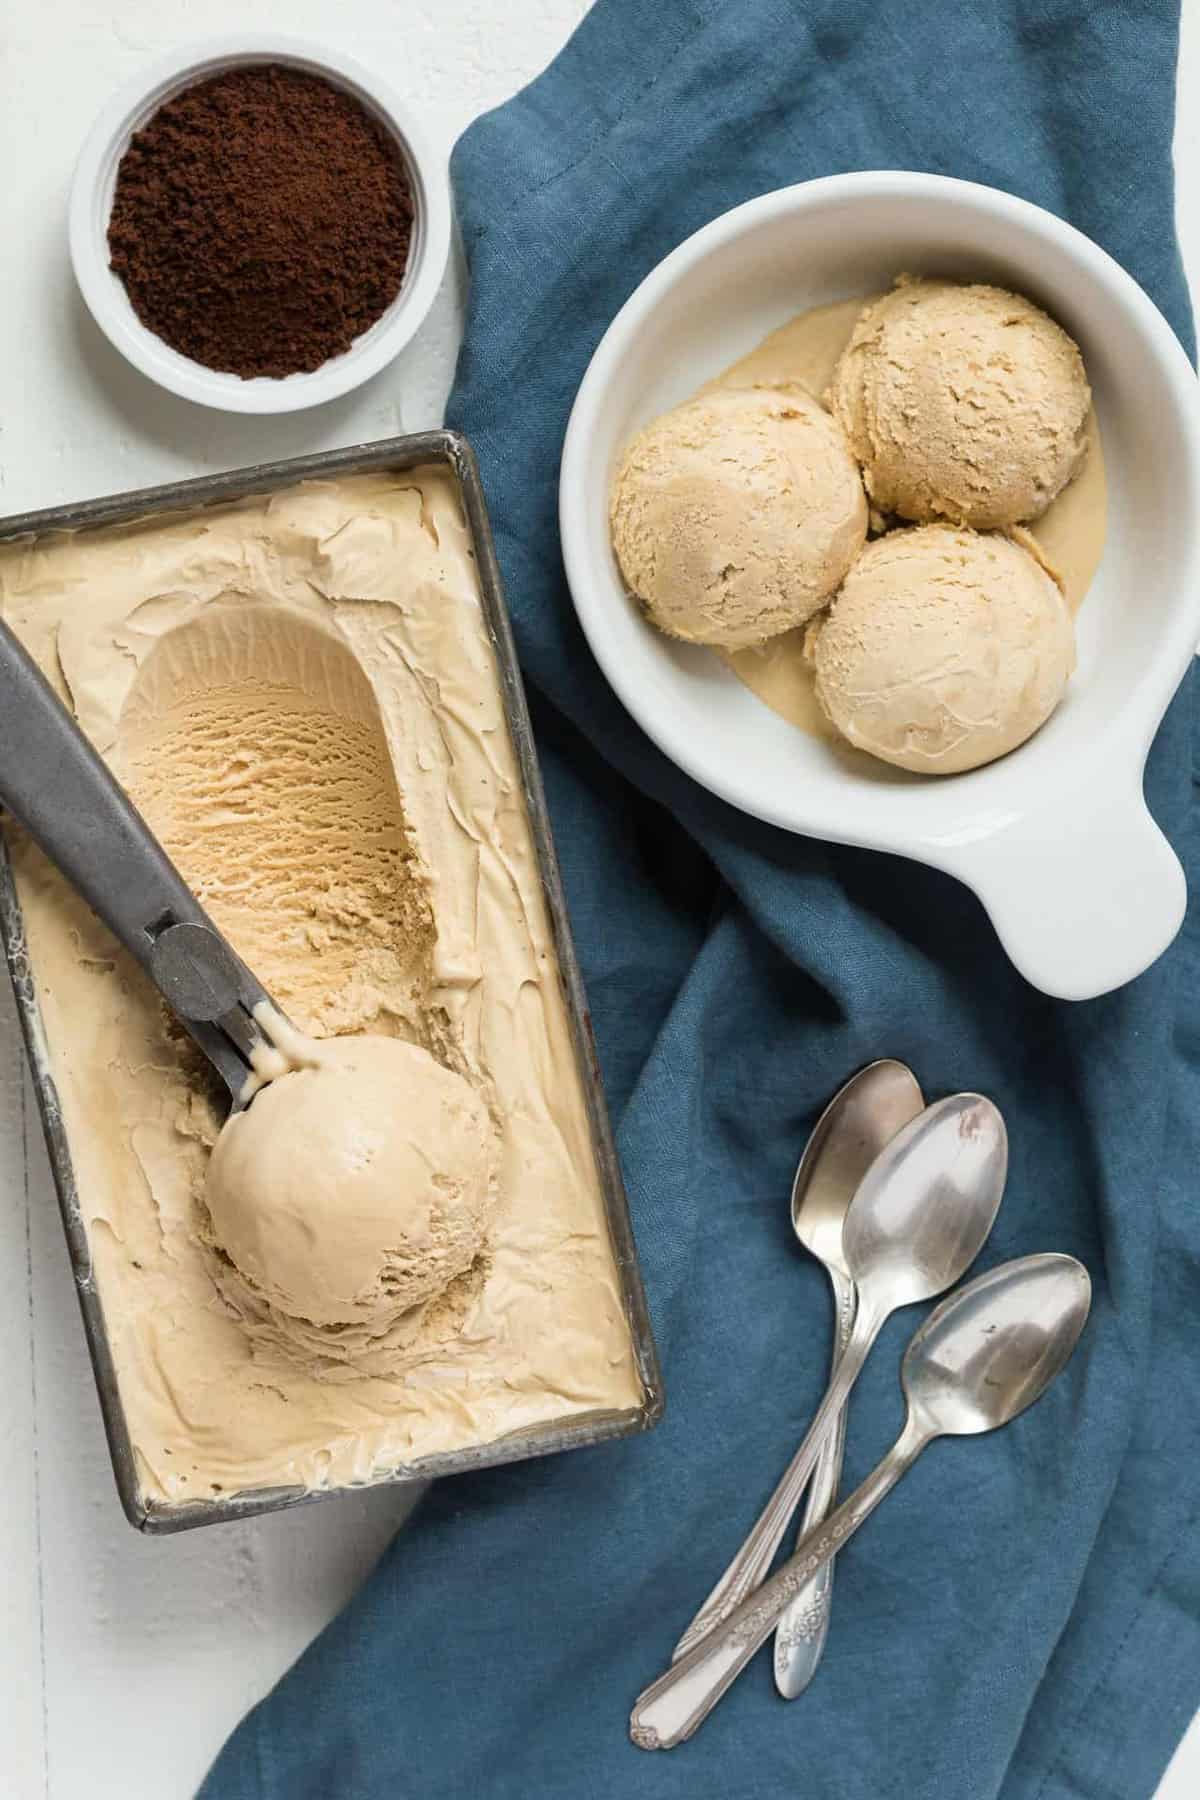 Homemade coffee ice cream being scooped out of a loaf pan into a white bowl.